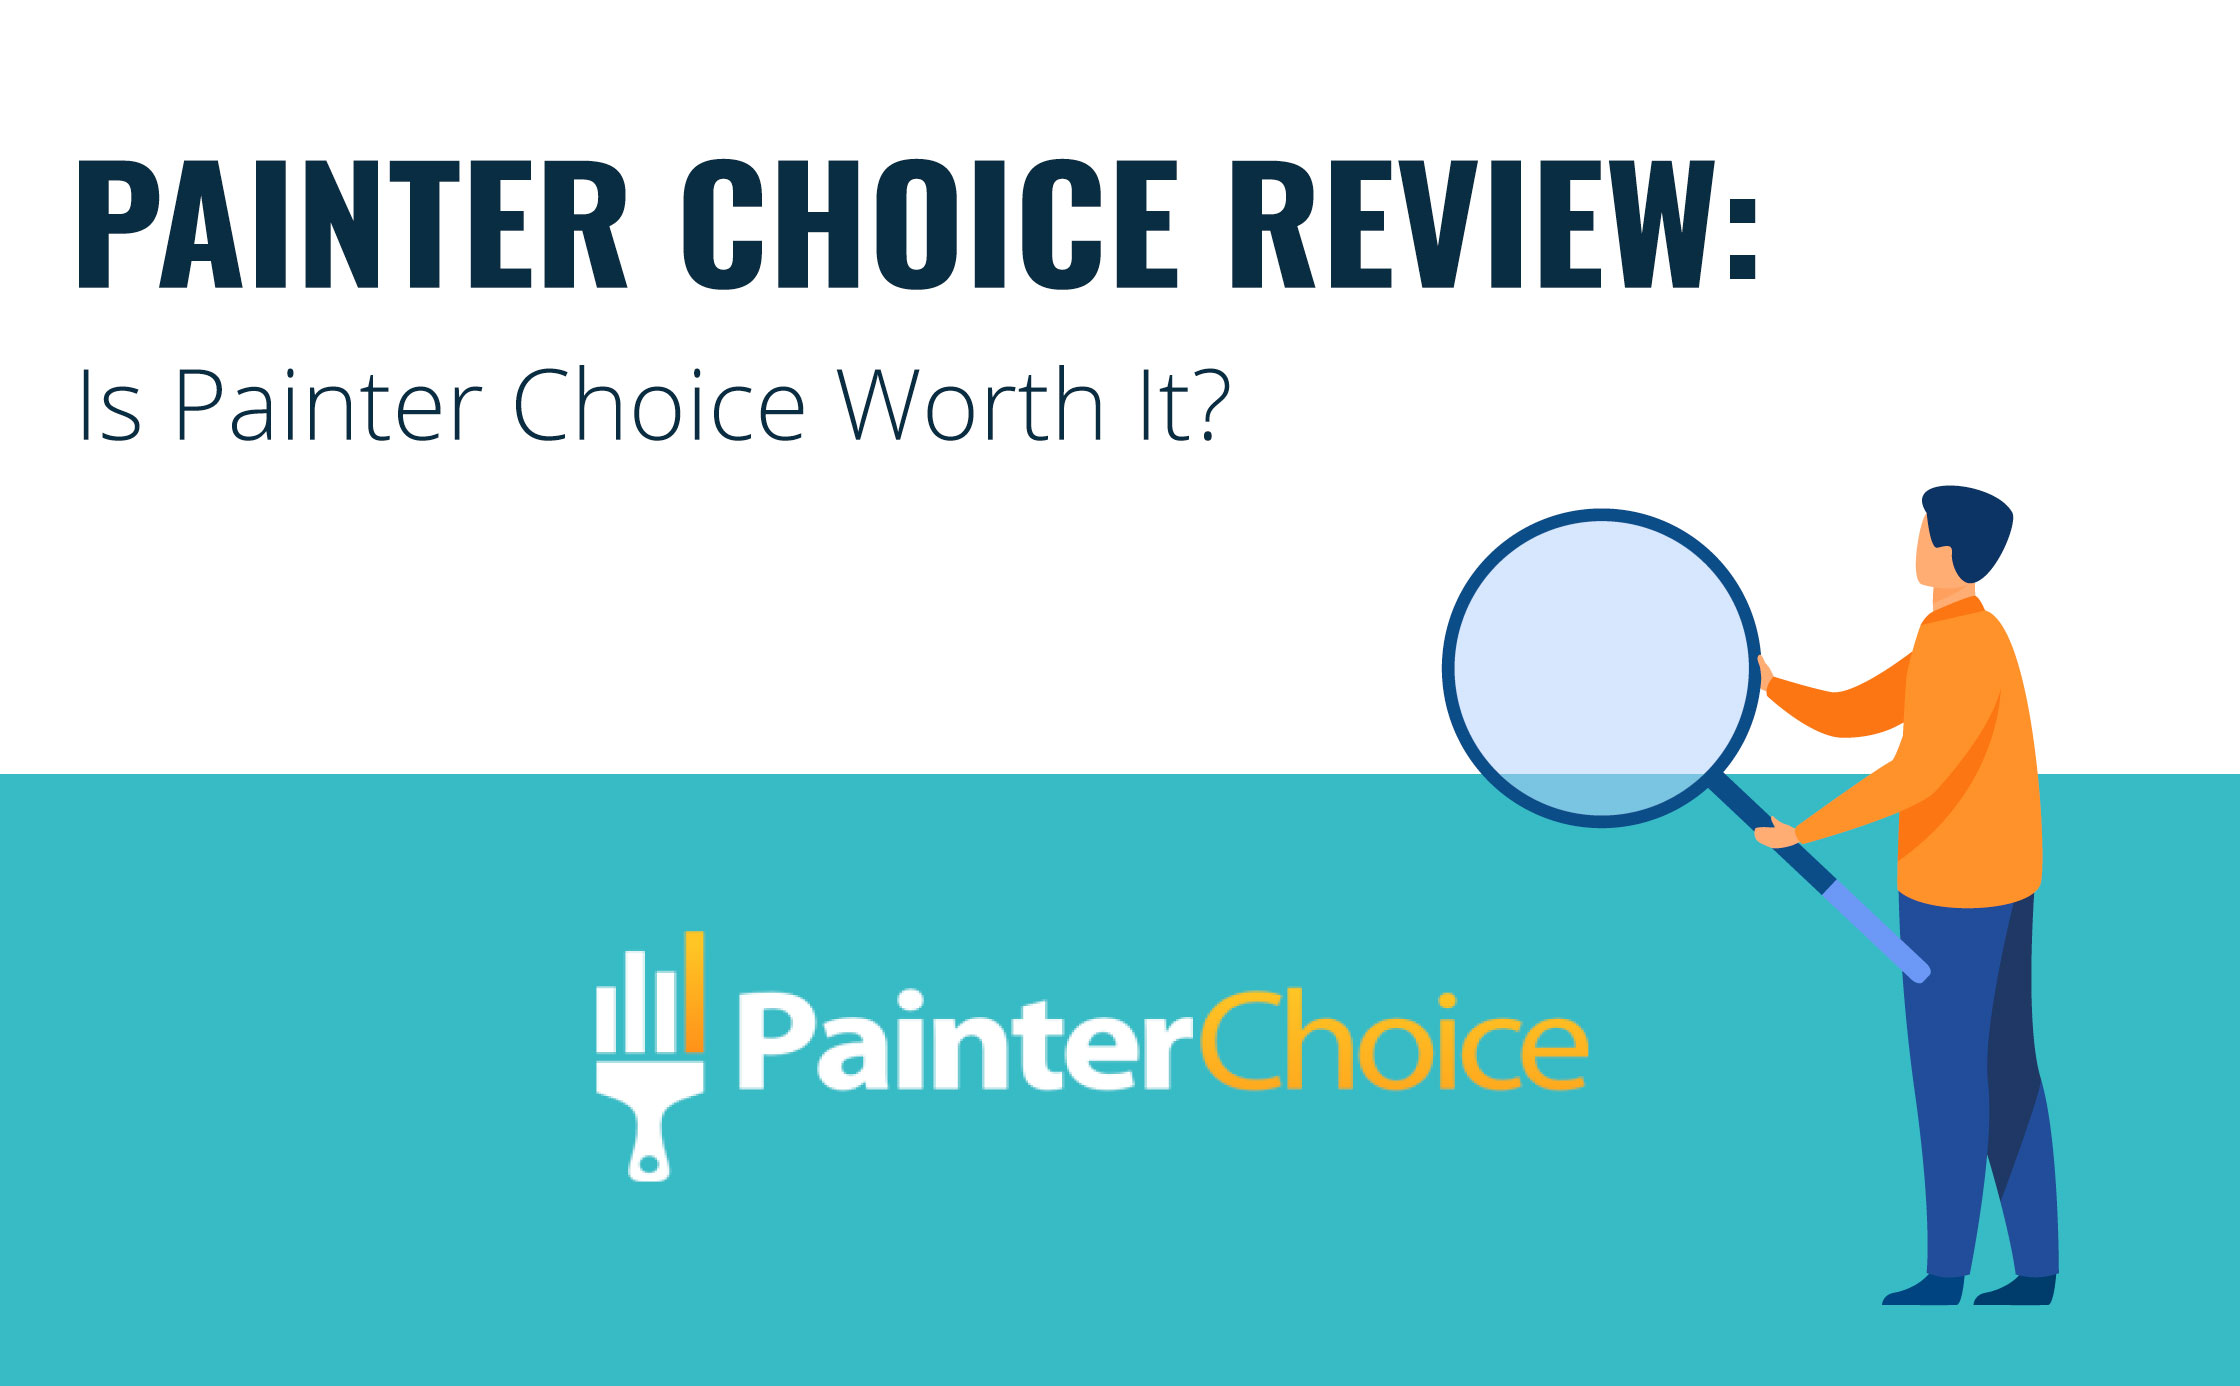 Painter Choice Review, is it worth it